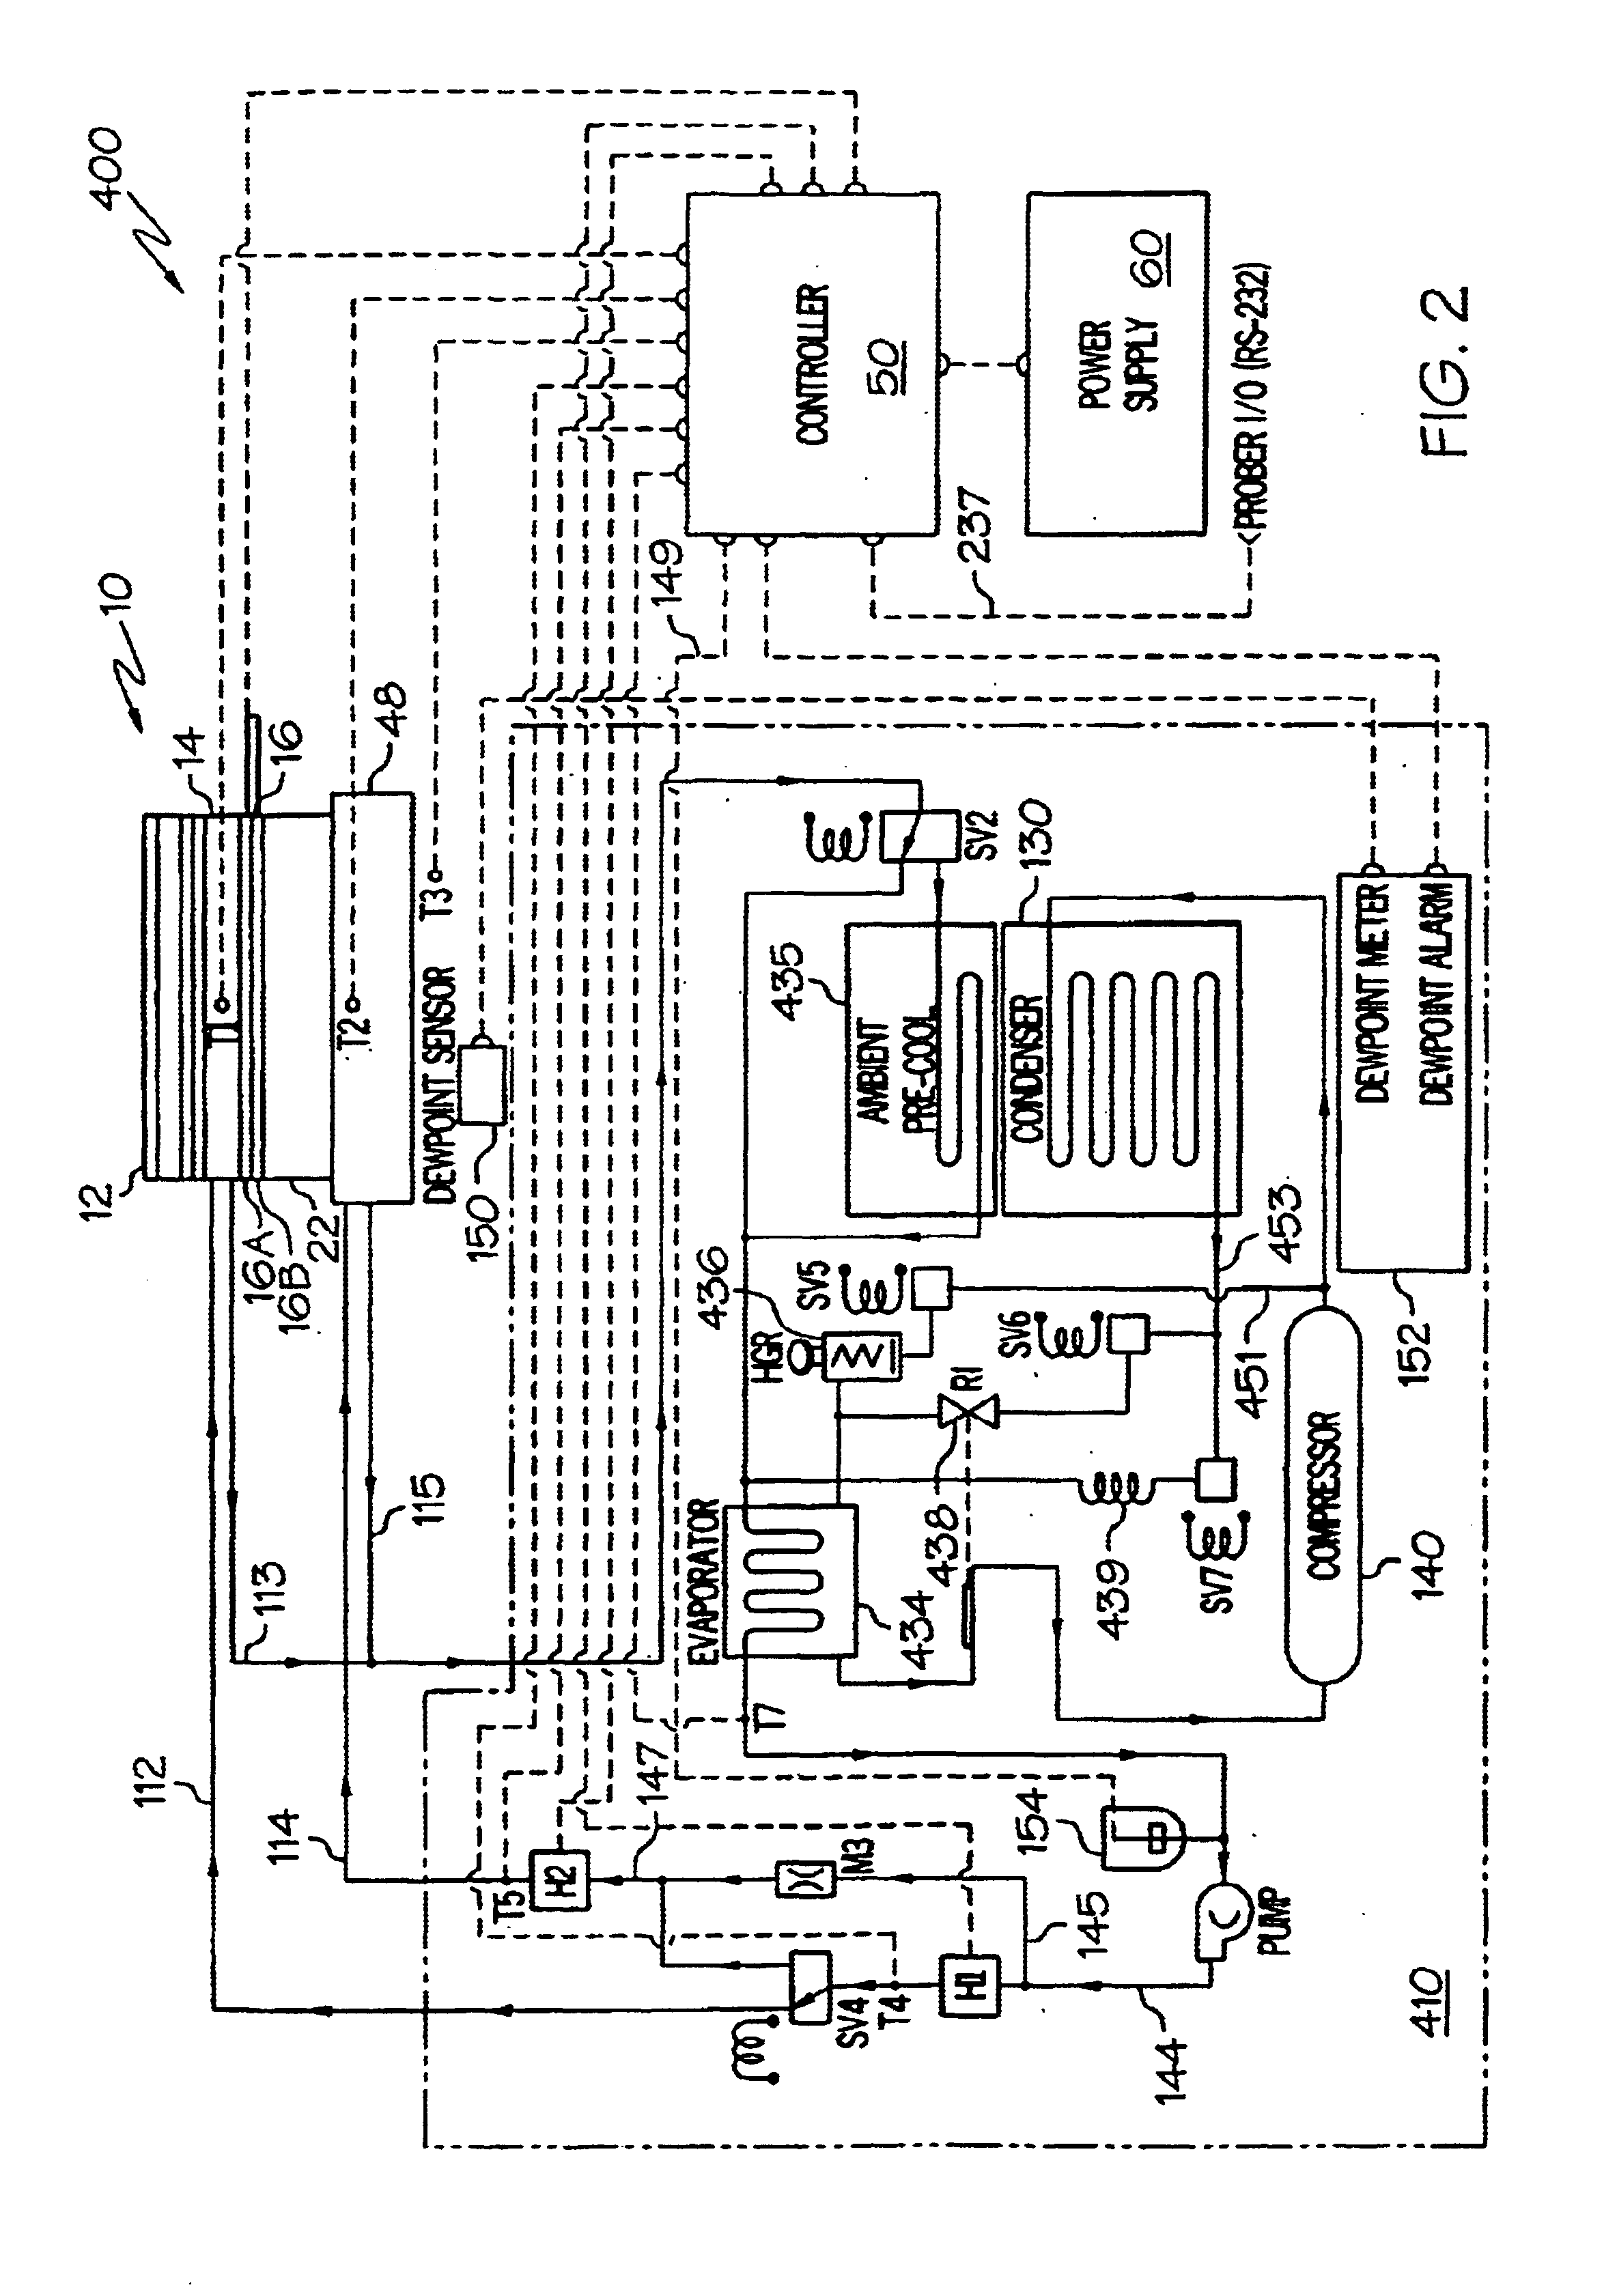 Temperature-controlled chuck with recovery of circulating temperature control fluid